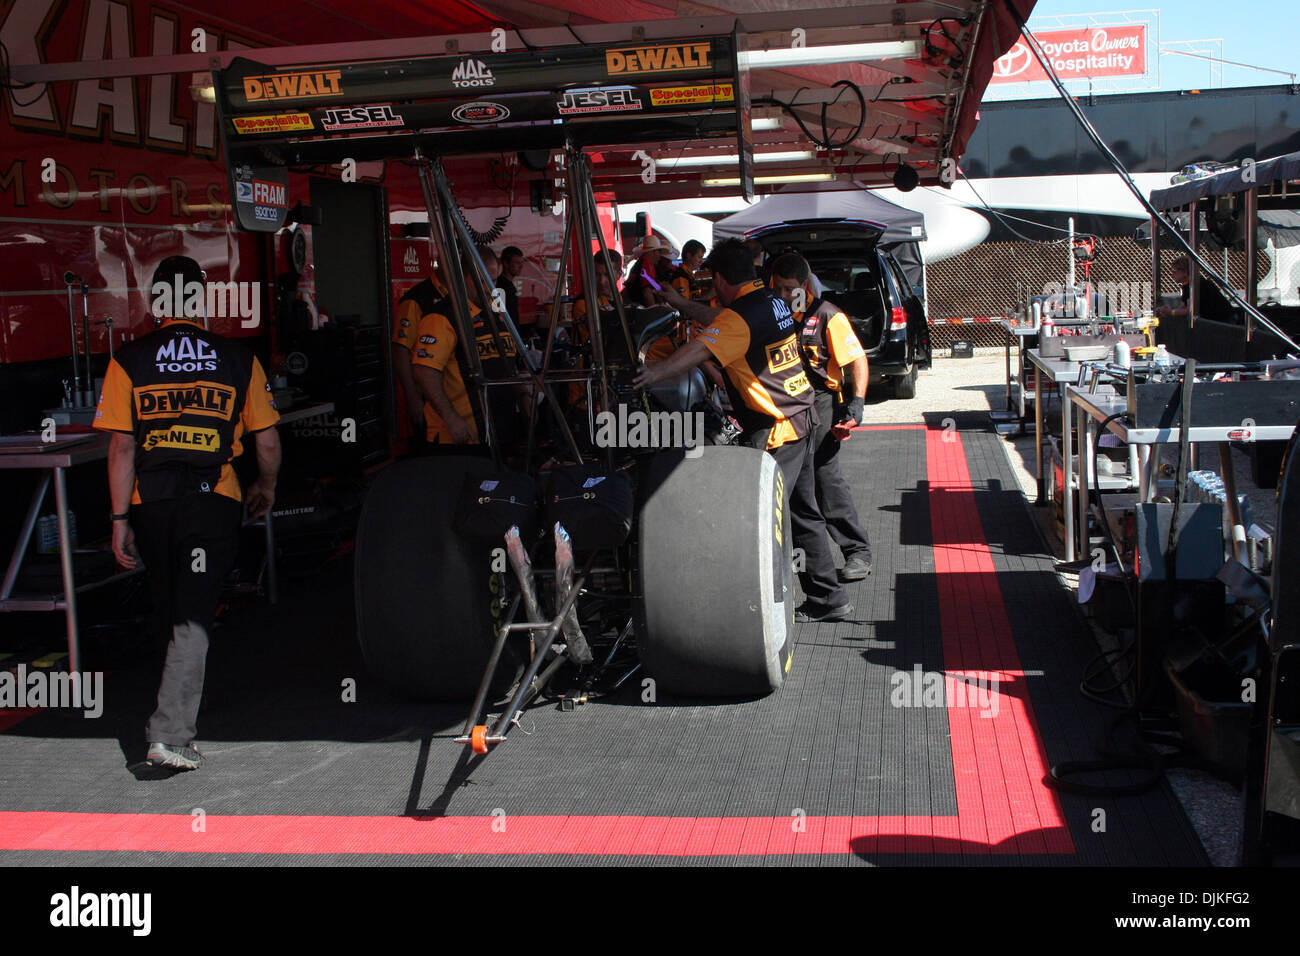 Sept. 5, 2010 - Indianapolis, Indiana, United States of America - 05 September2010: The crew for Doug Kalitta's dragster do some work on the car. The U.S. Nationals were held at O'Reilly Raceway Park in Indianapolis, Indiana. (Credit Image: © Alan Ashley/Southcreek Global/ZUMApress.com) Stock Photo